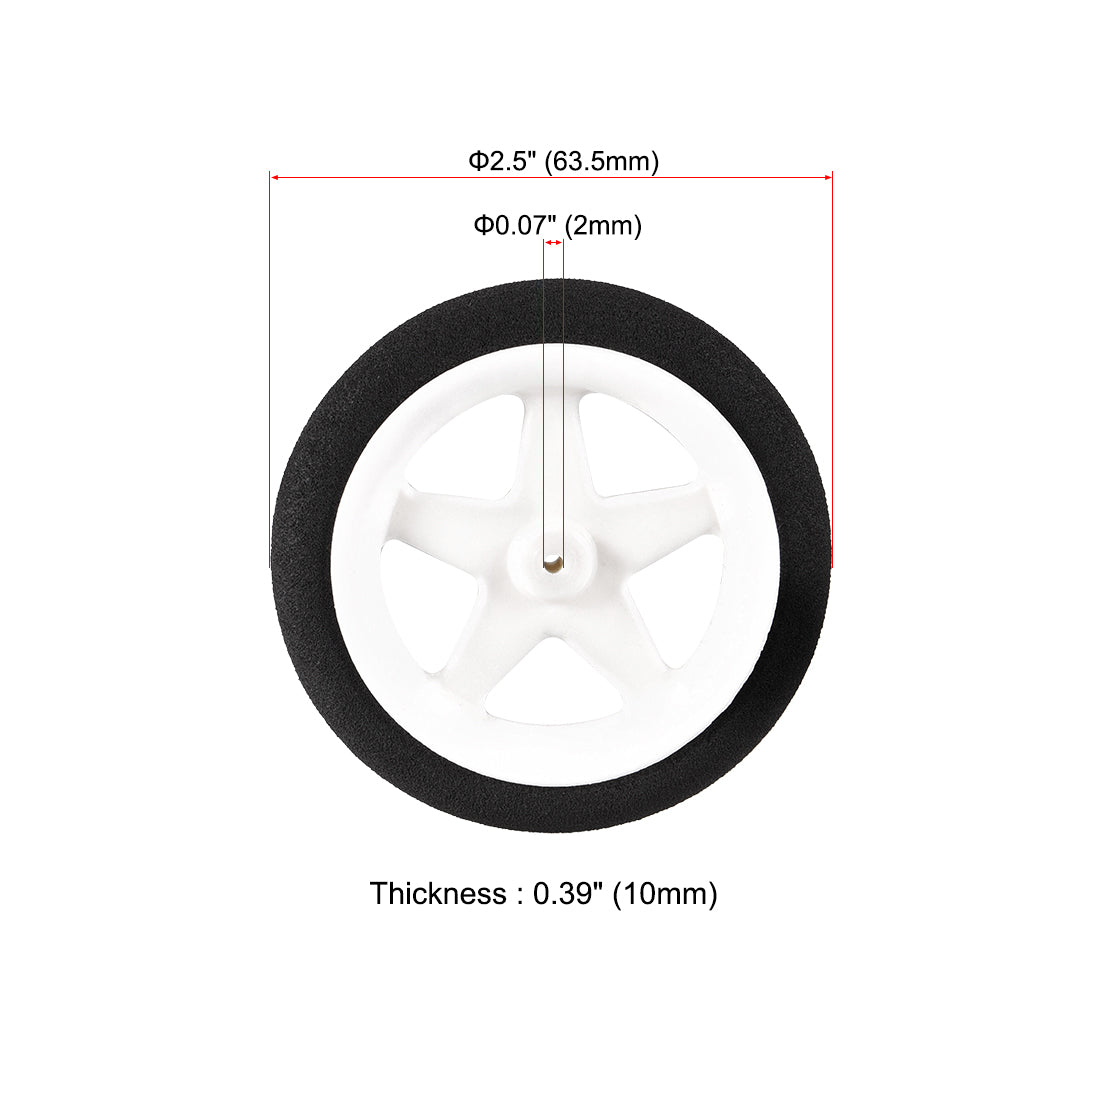 uxcell Uxcell RC Model Plane Aircraft Wheel Micro Sport Wheel 0.07 inch x 2.5 inch -   Wheel 6PCS